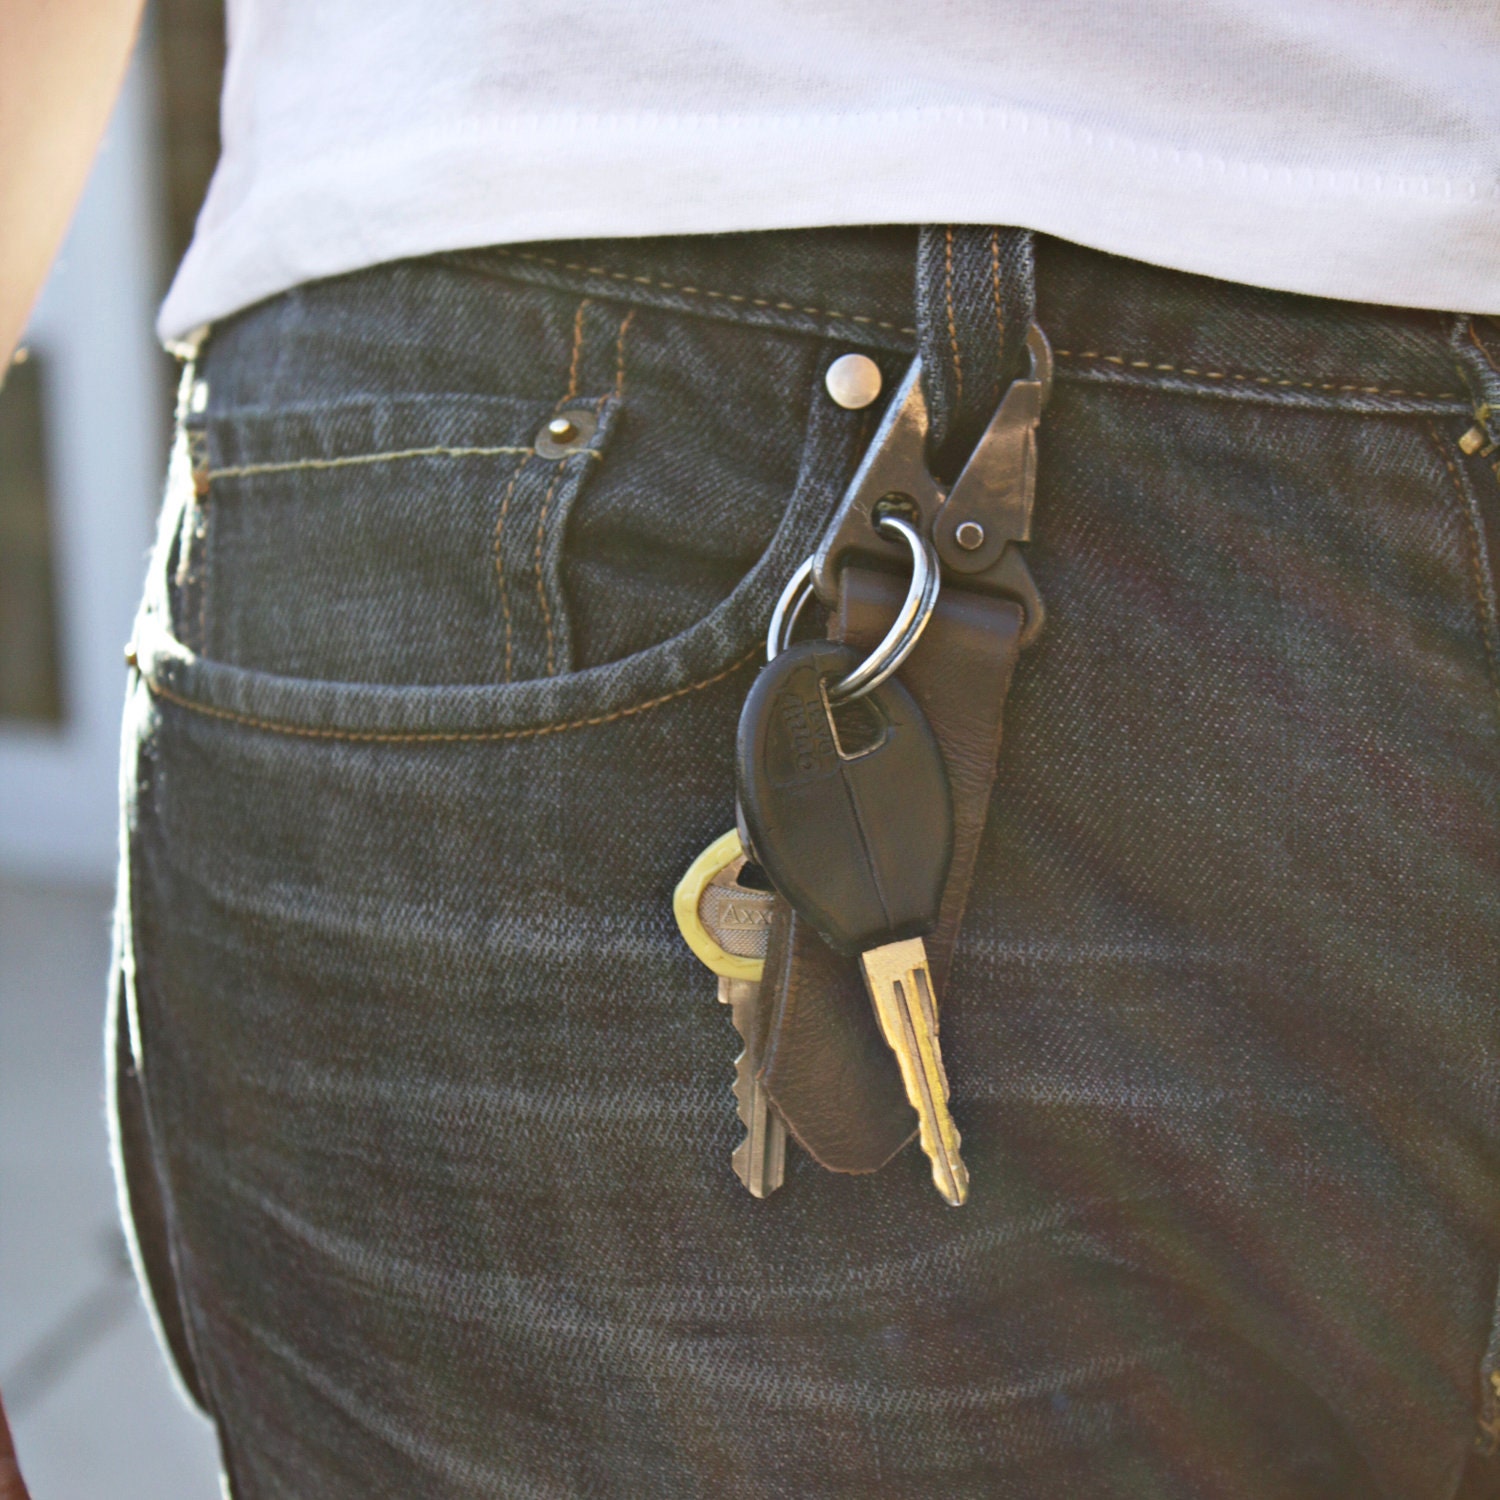 Leather keychain with belt loop carabiner style hook by UNIONS